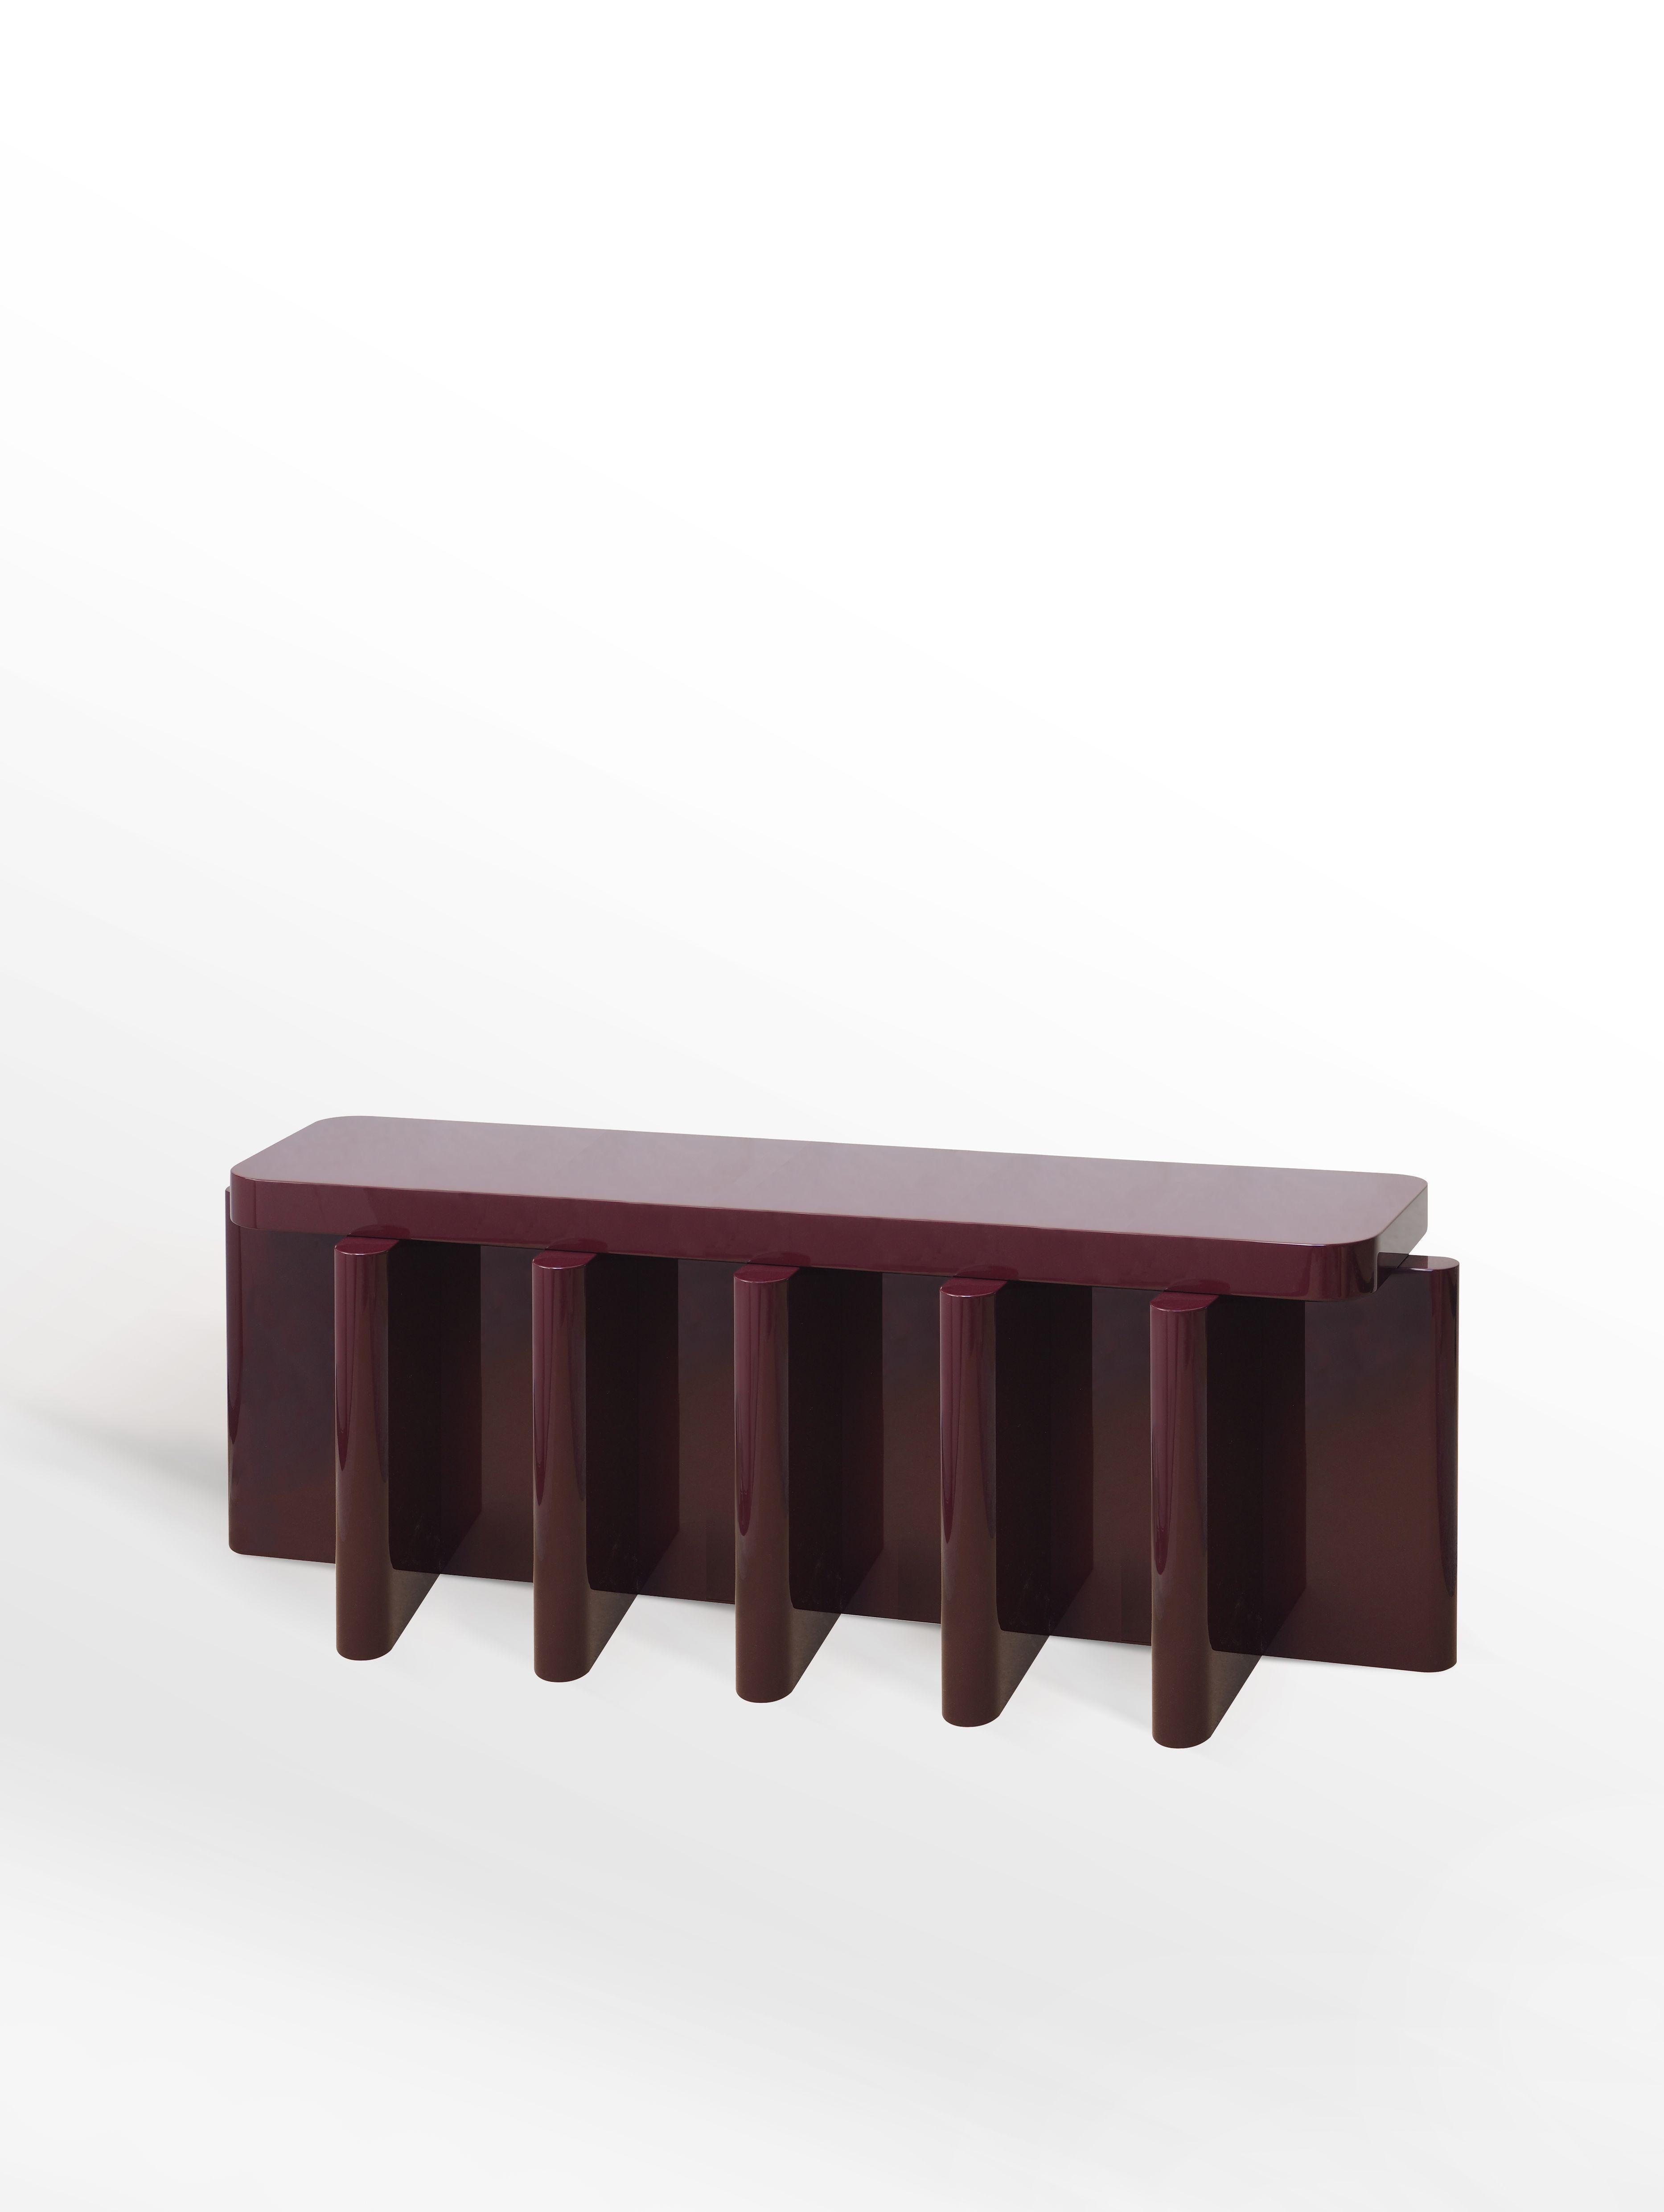 Lacquer Spina Side Table in Wood 3 Edited by Portego Customizable Bench For Sale